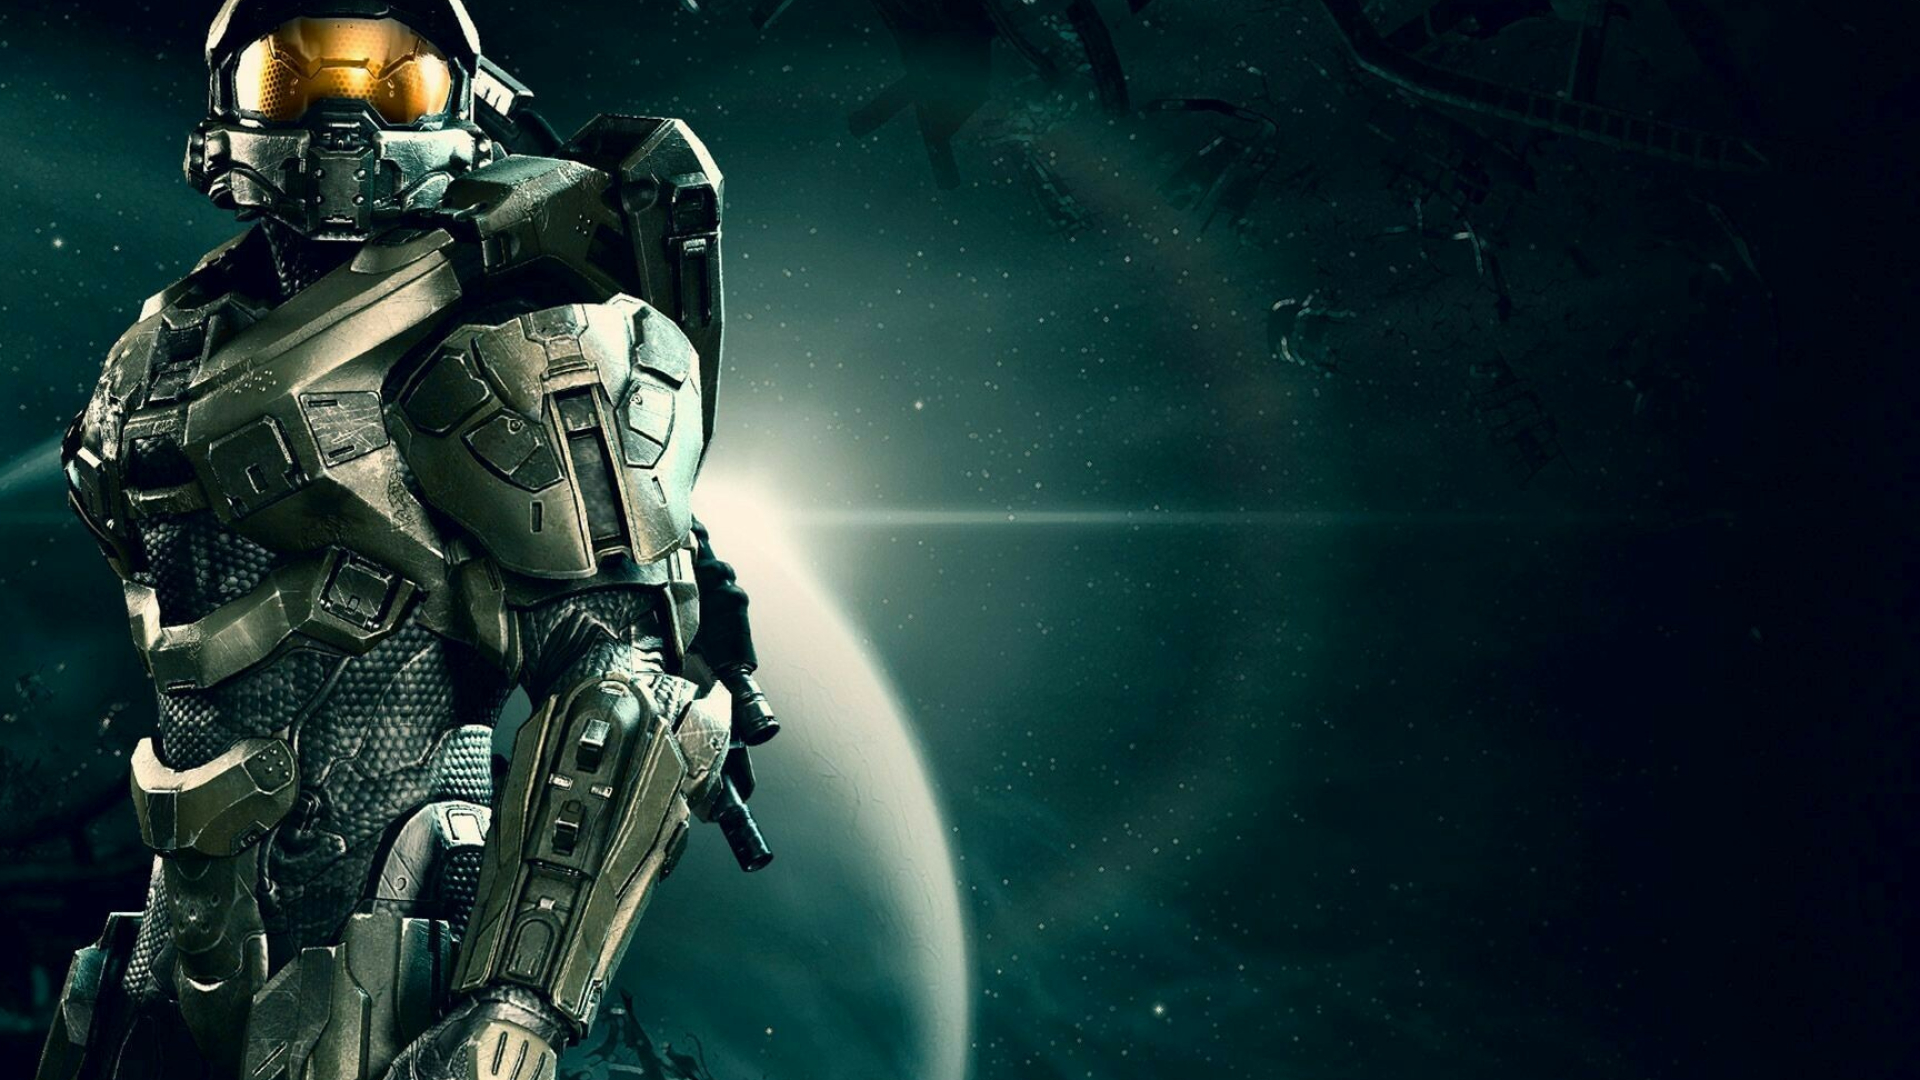 Halo: Master Chief is entrusted with safeguarding Cortana, the ship's artificial intelligence, from capture, Action game. 1920x1080 Full HD Background.